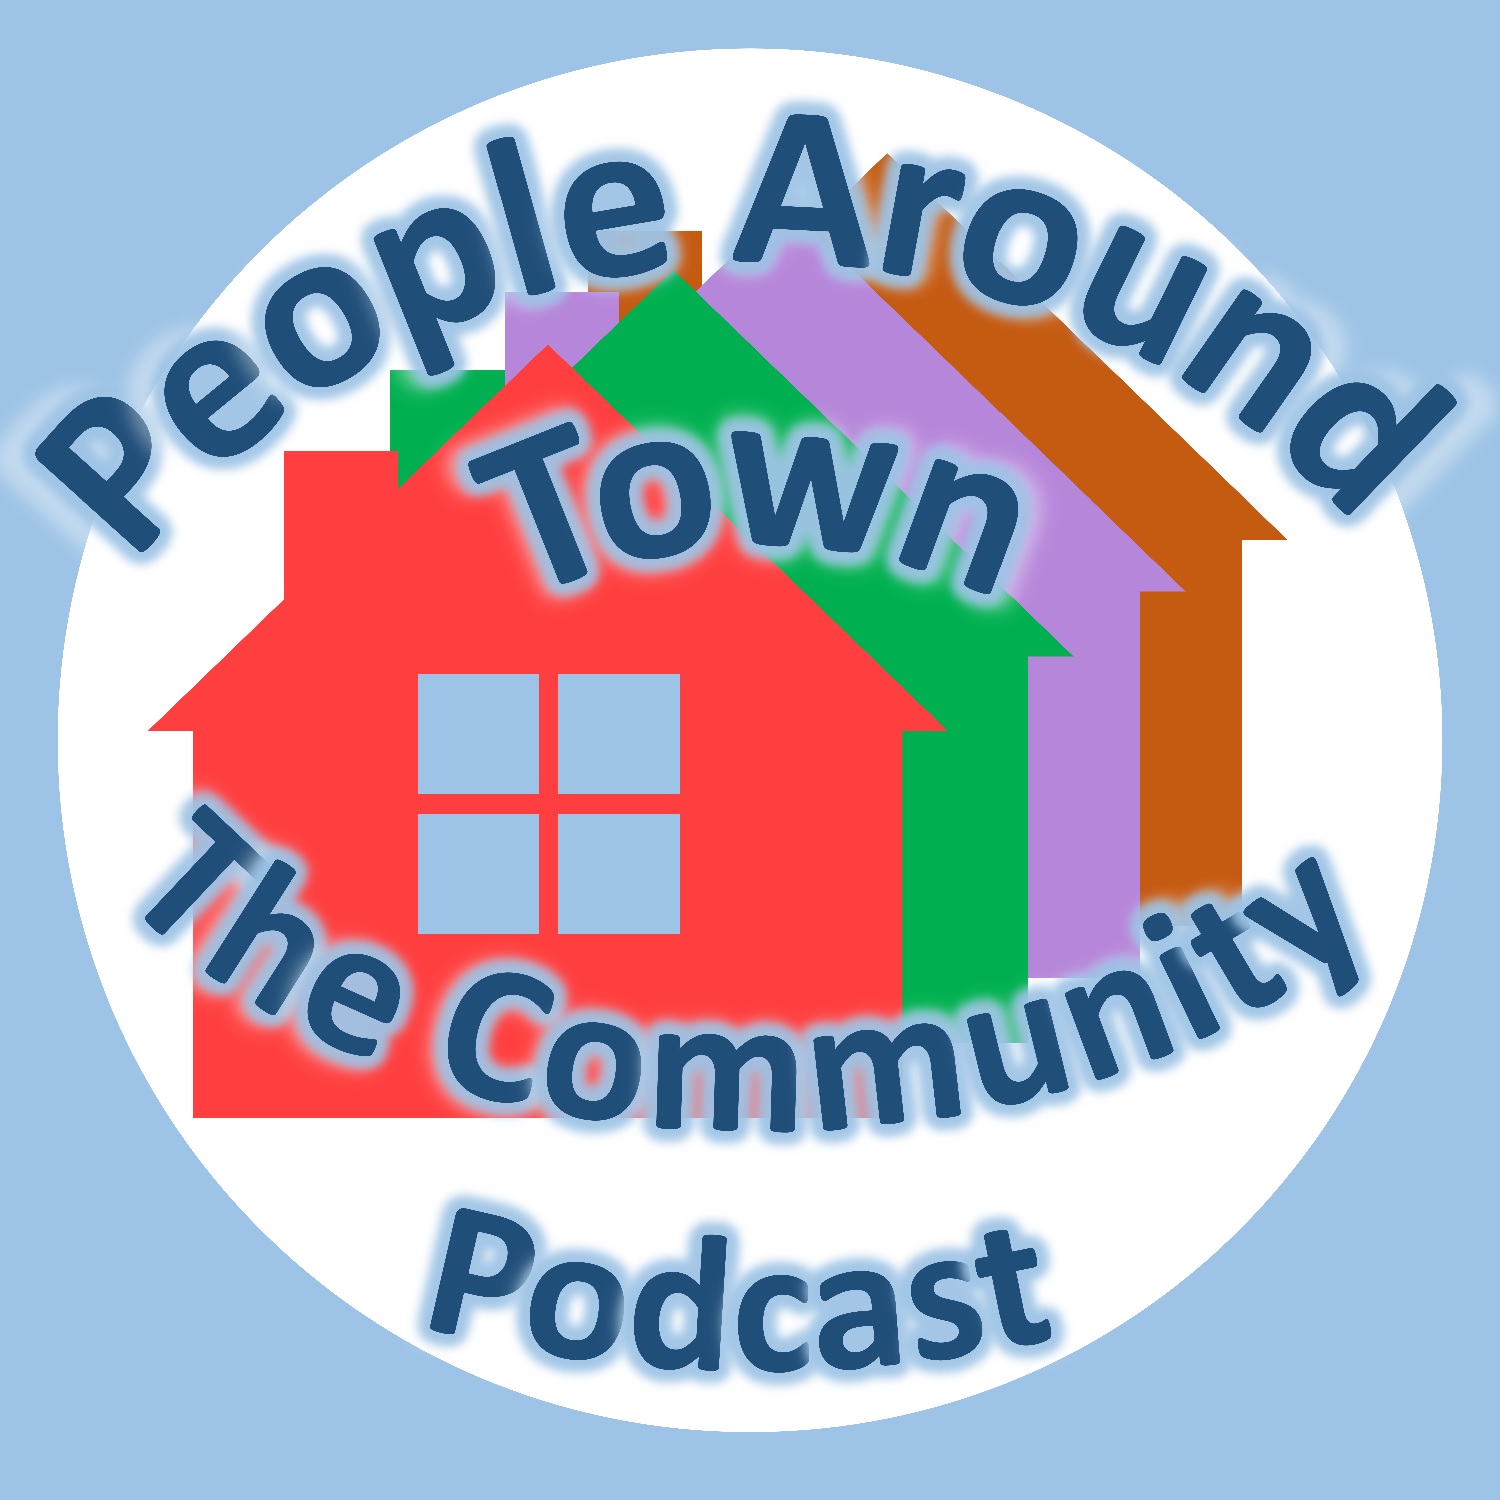 People Around Town: The Community Podcast